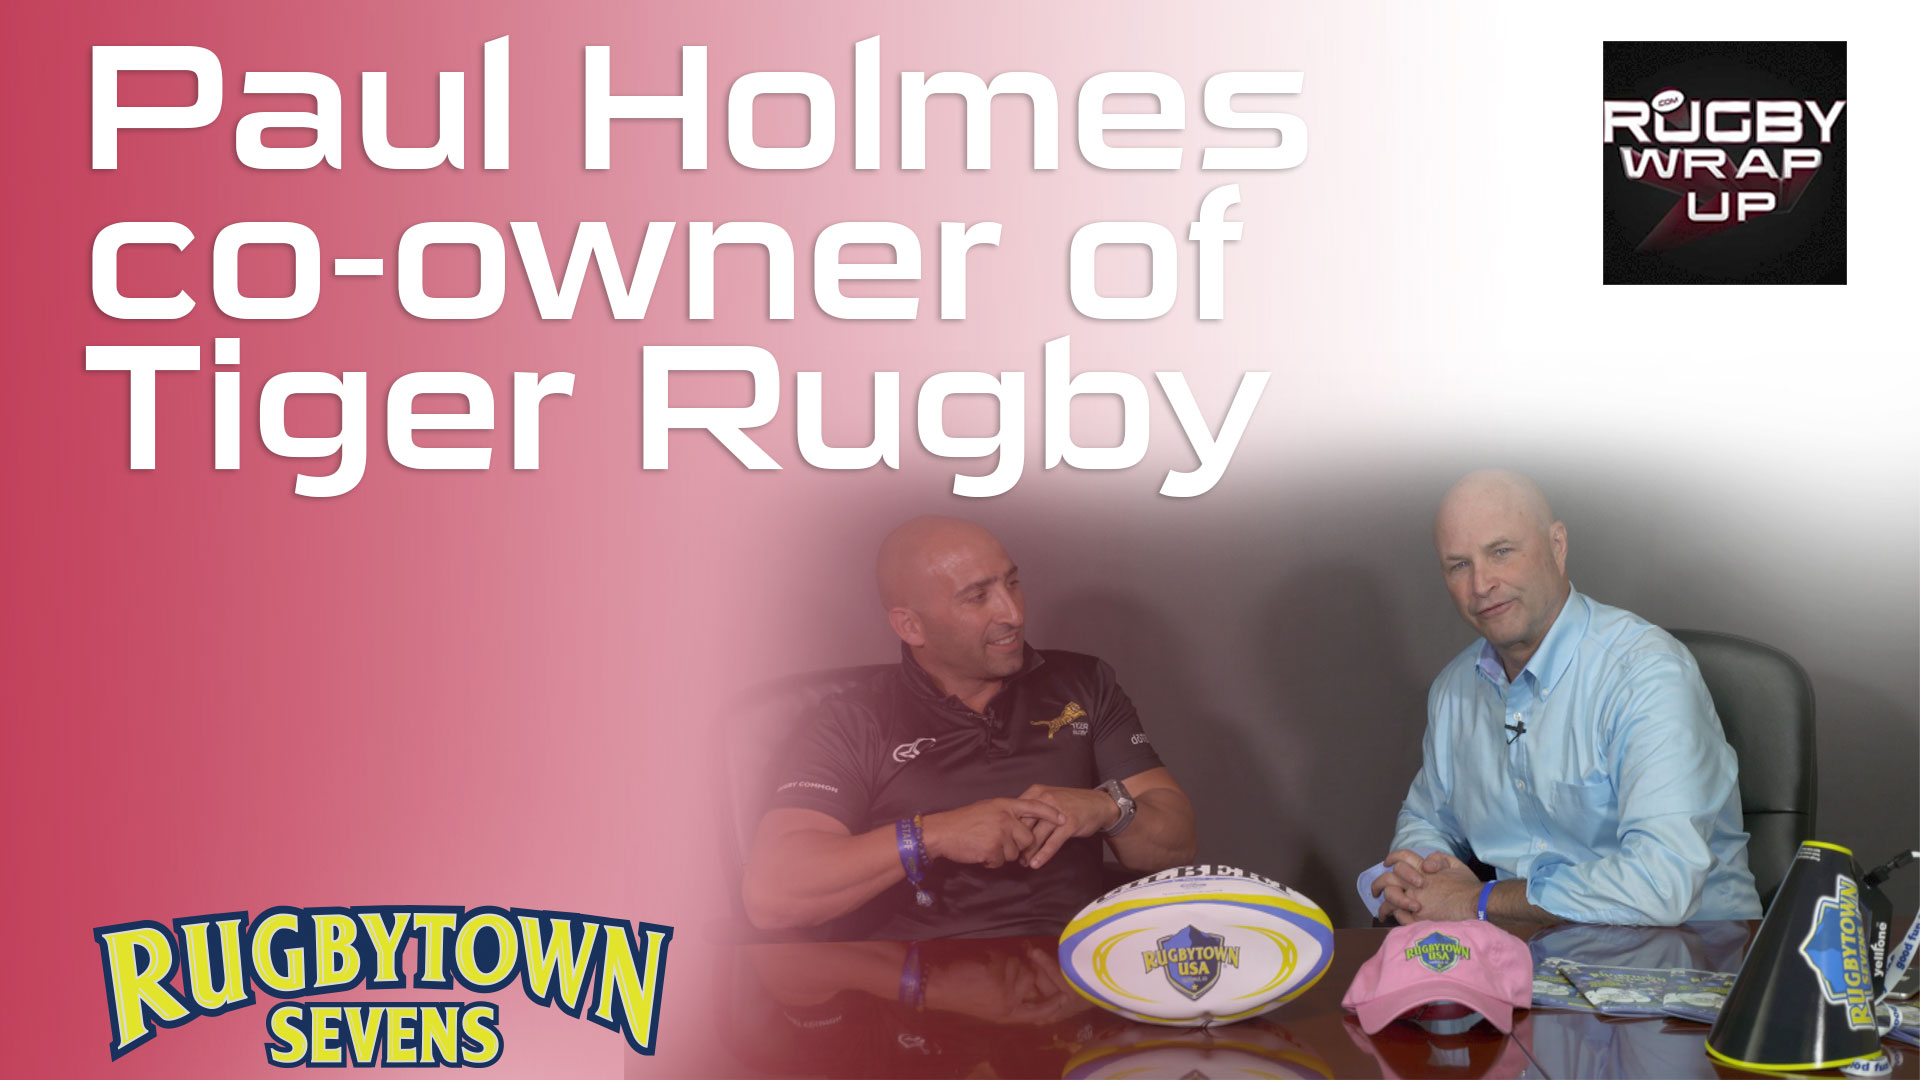 rugby-tv-and-podcast-paul-holmes-of-tiger-rugby-rugby-town-7s